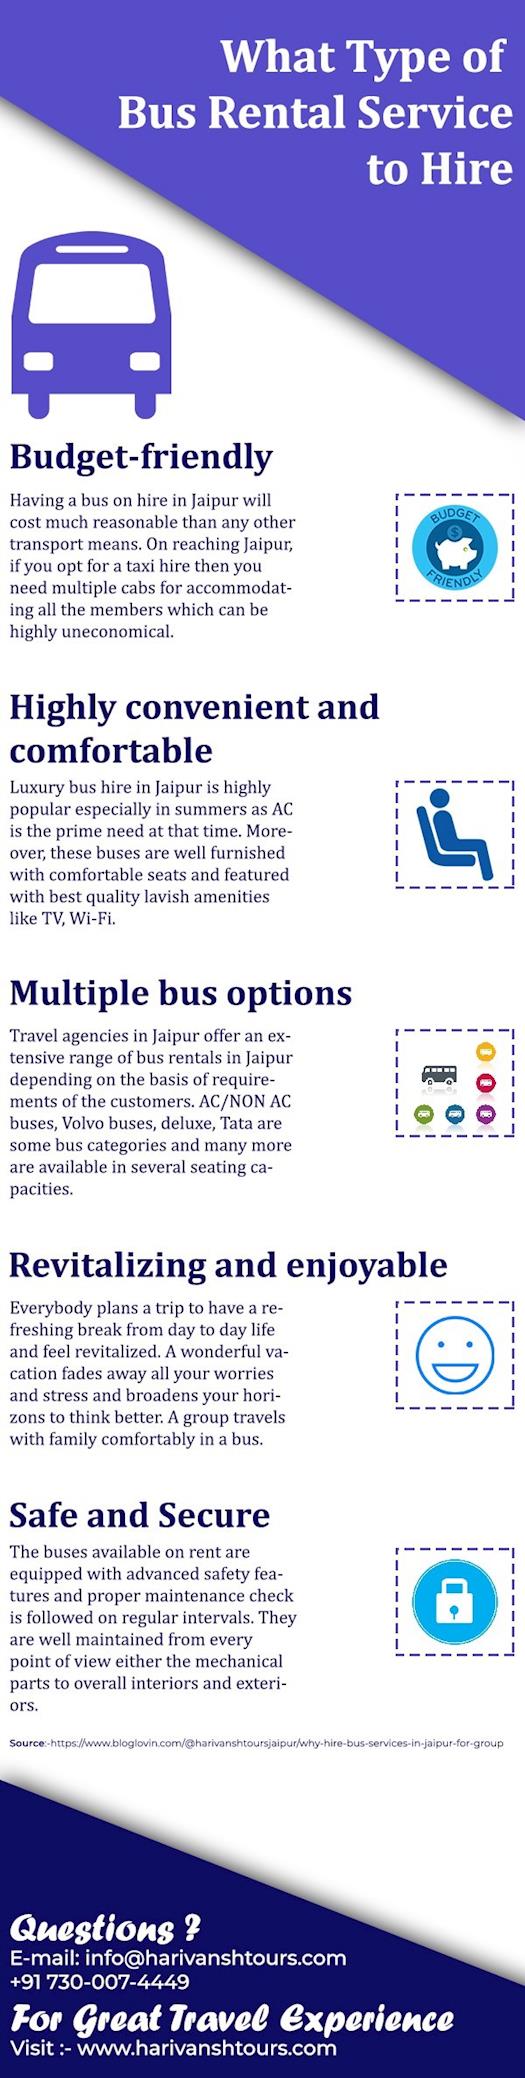 What Type of Bus Rental Service to Hire